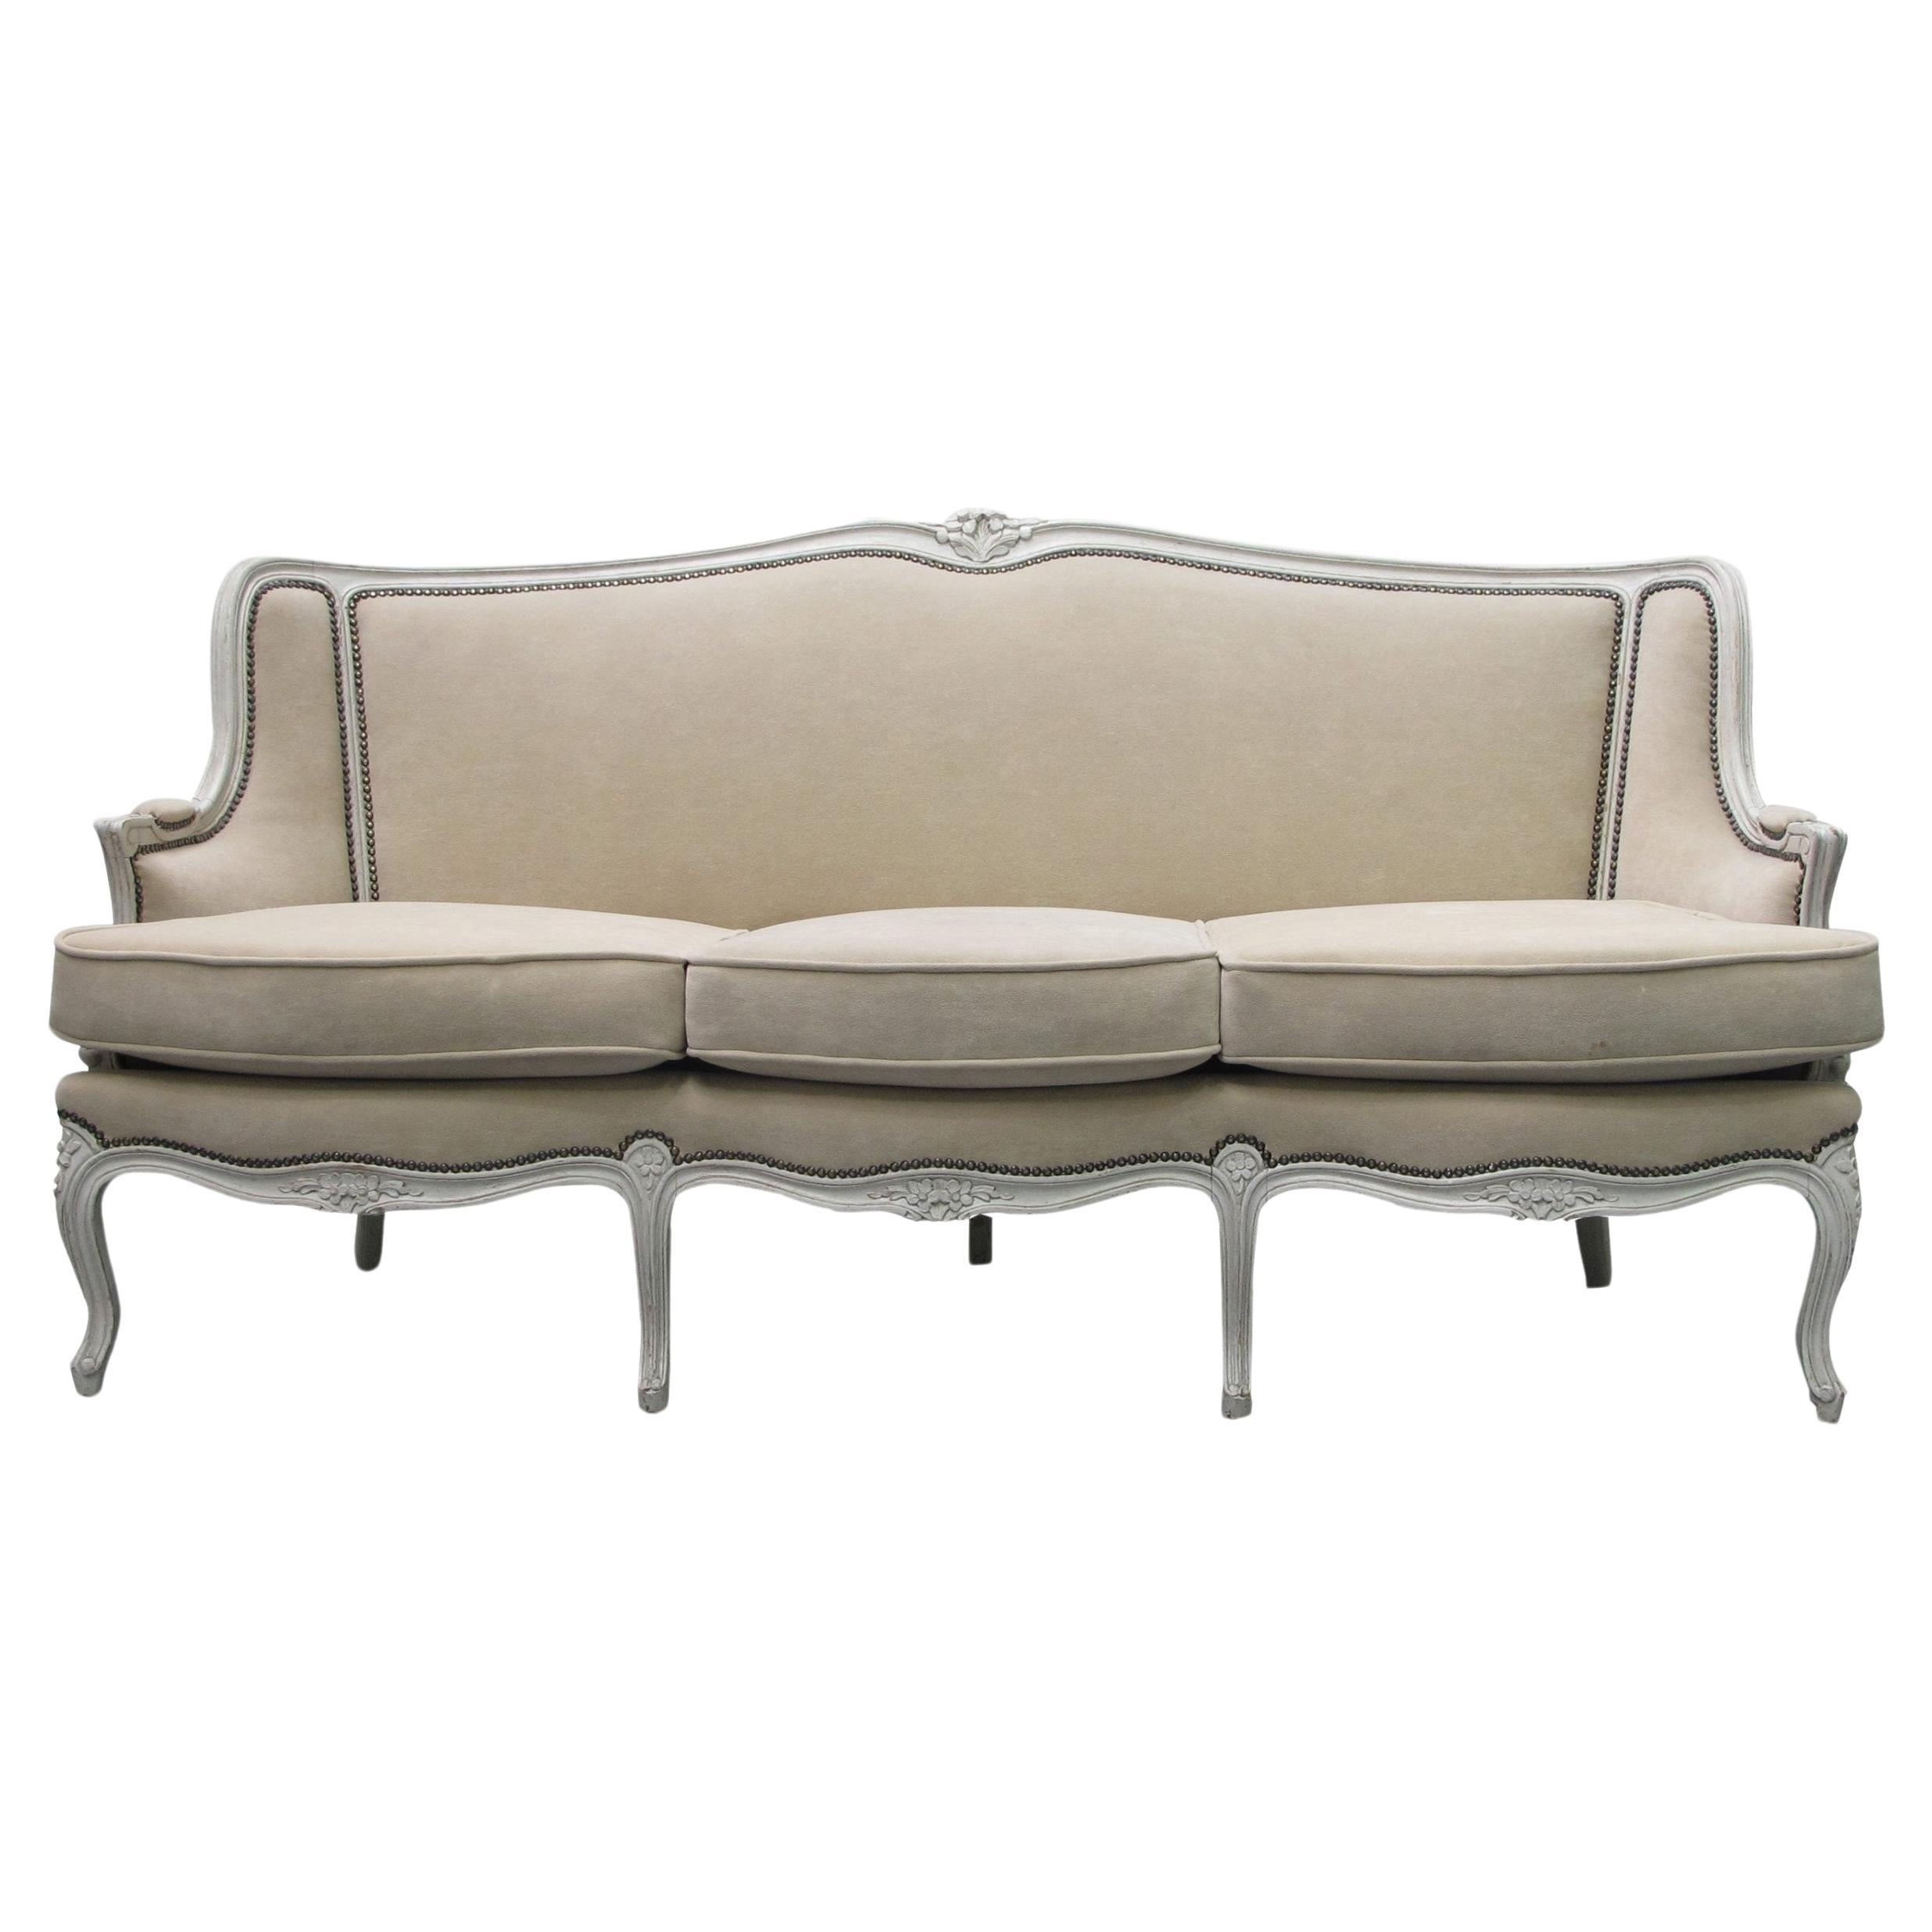 Early 20th Century French Three Seater Sofa, Louis XV Style With Painted Frame For Sale